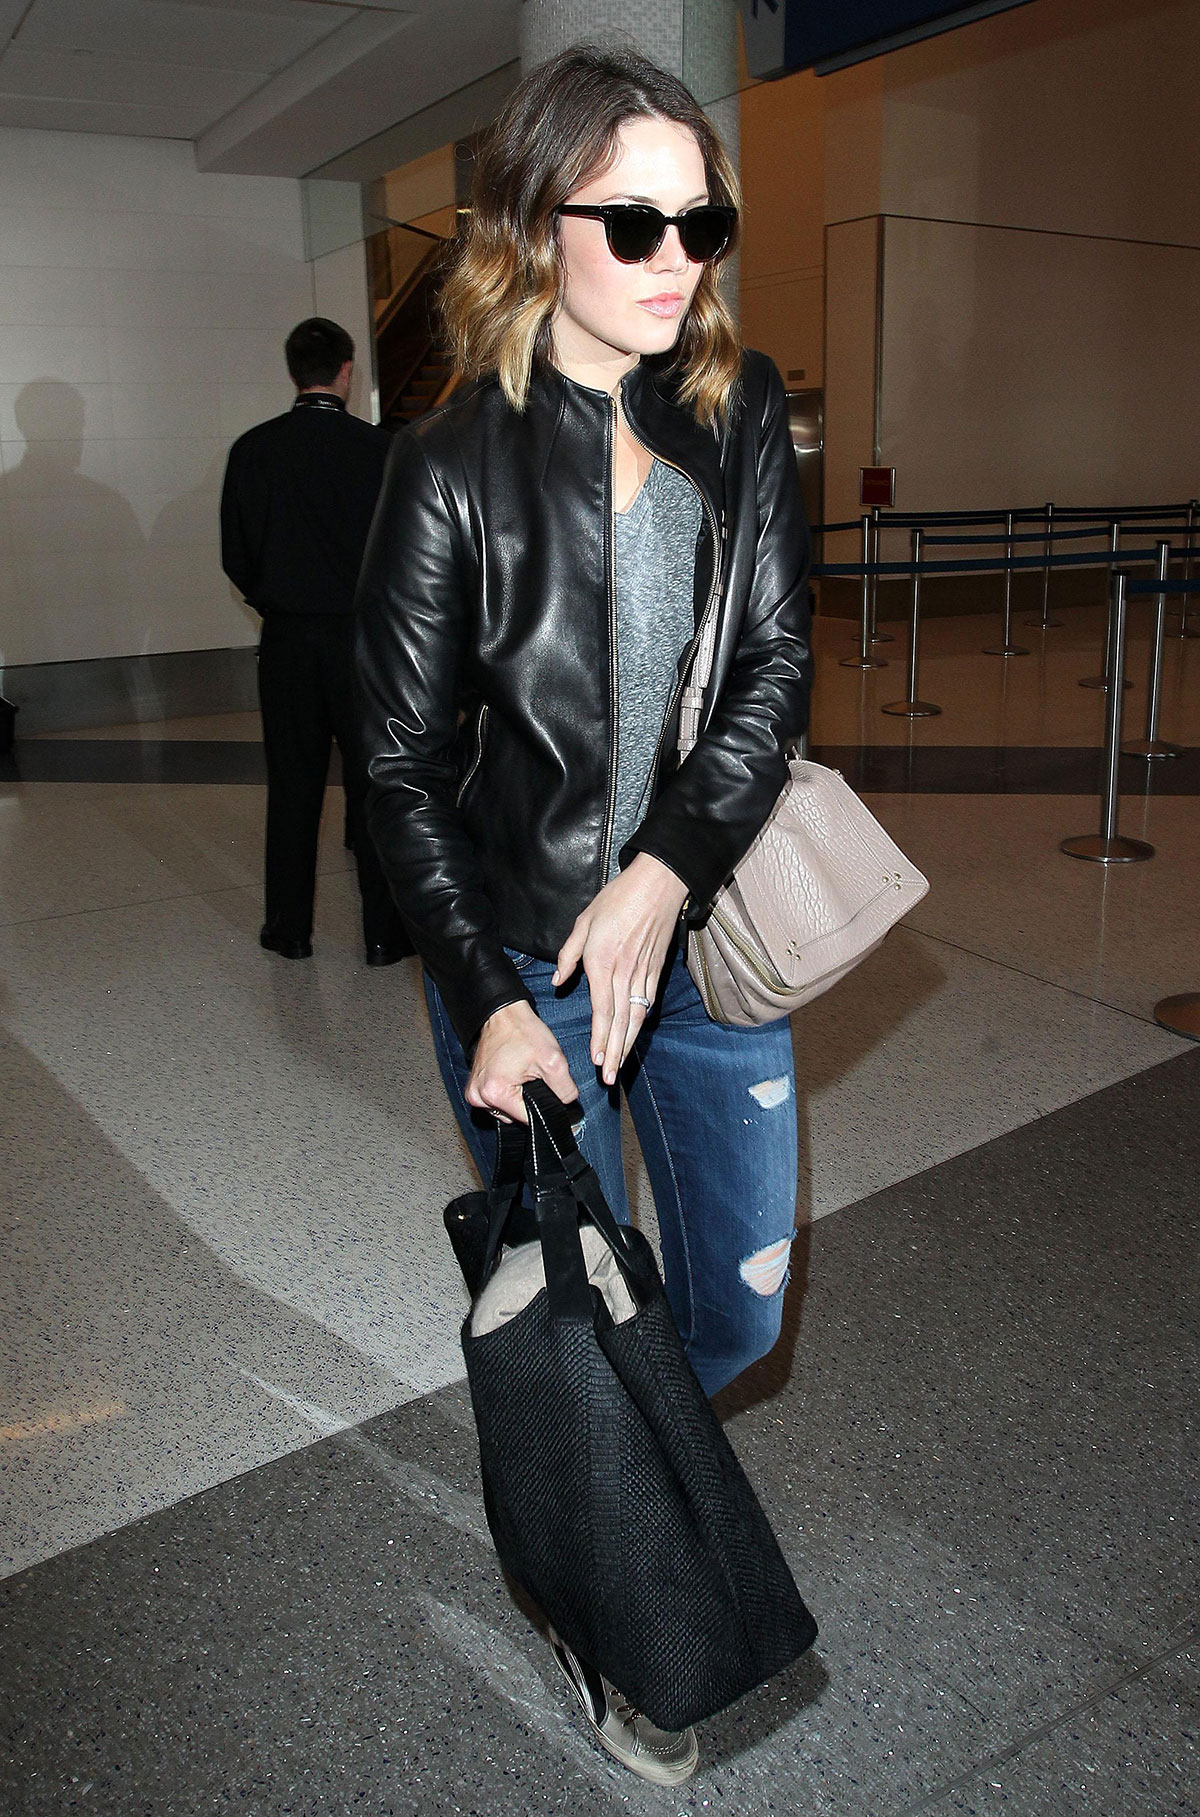 Mandy Moore arrives at the Los Angeles International Airport